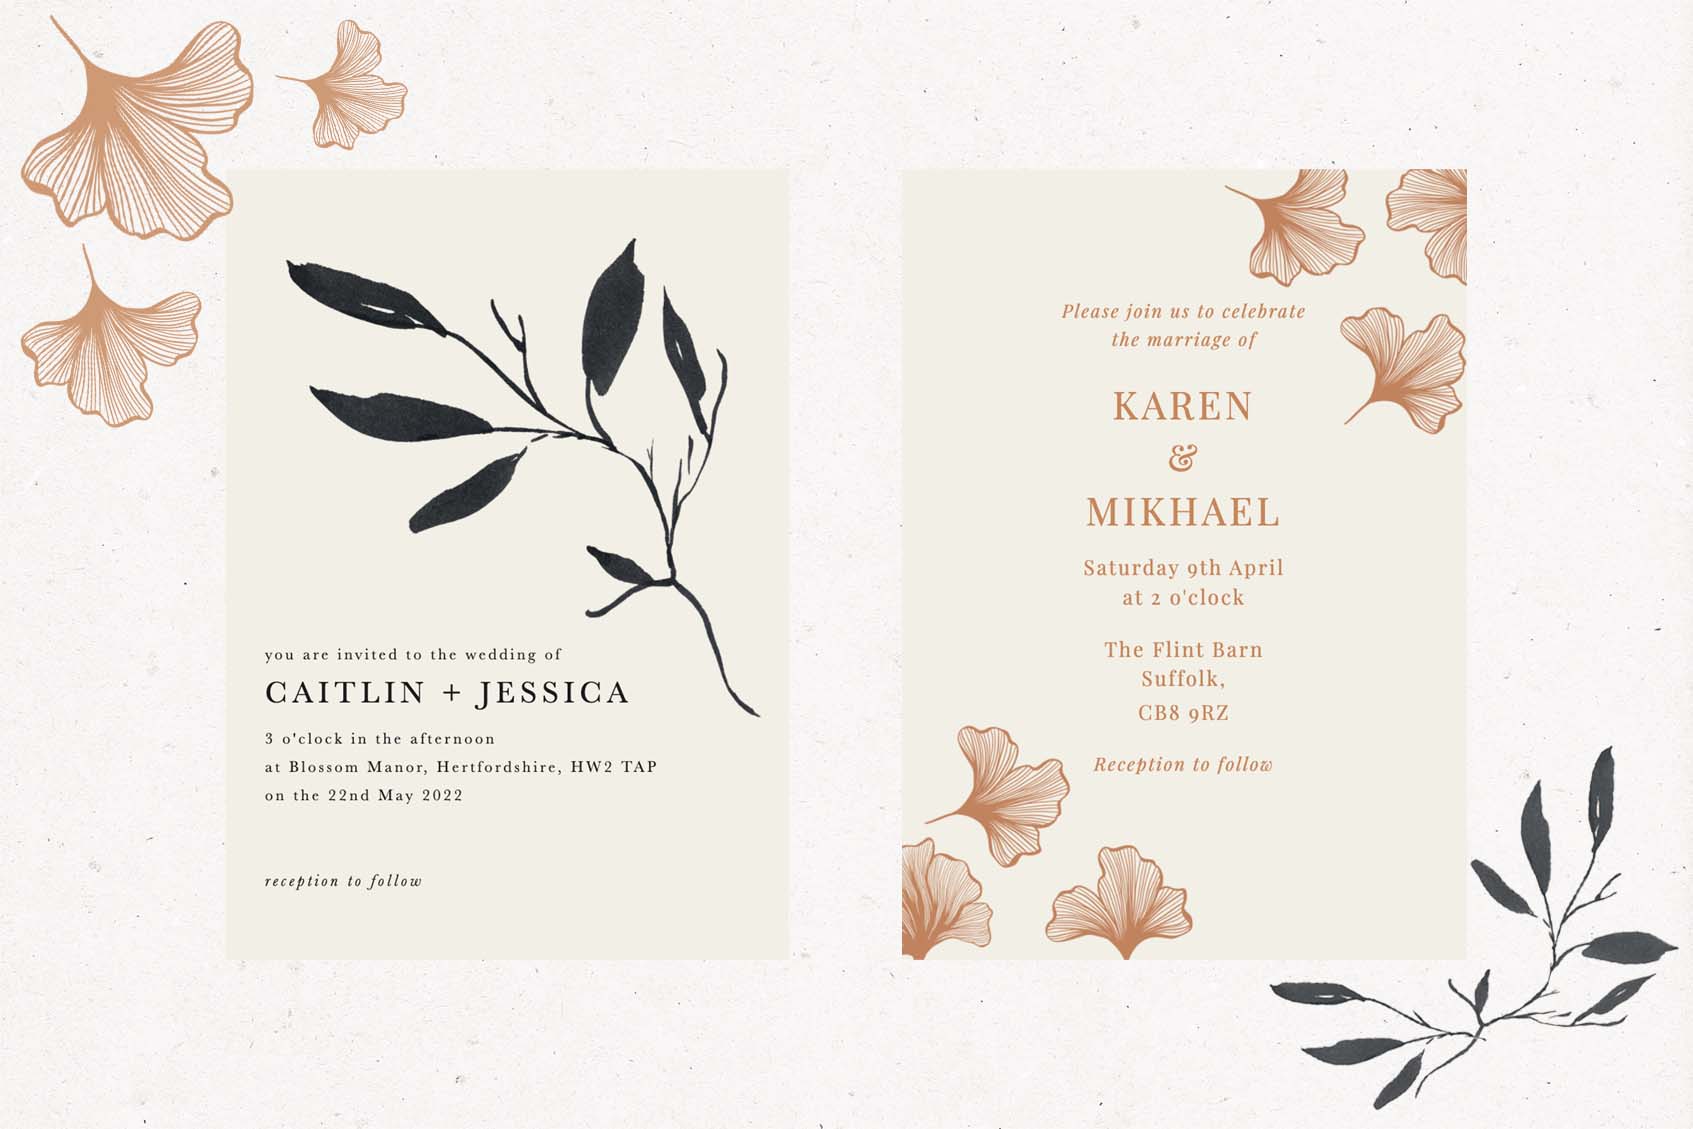 Two luxury g . f. smith wedding invitations in cream, black and orange colours, with decorative leaf illustrations